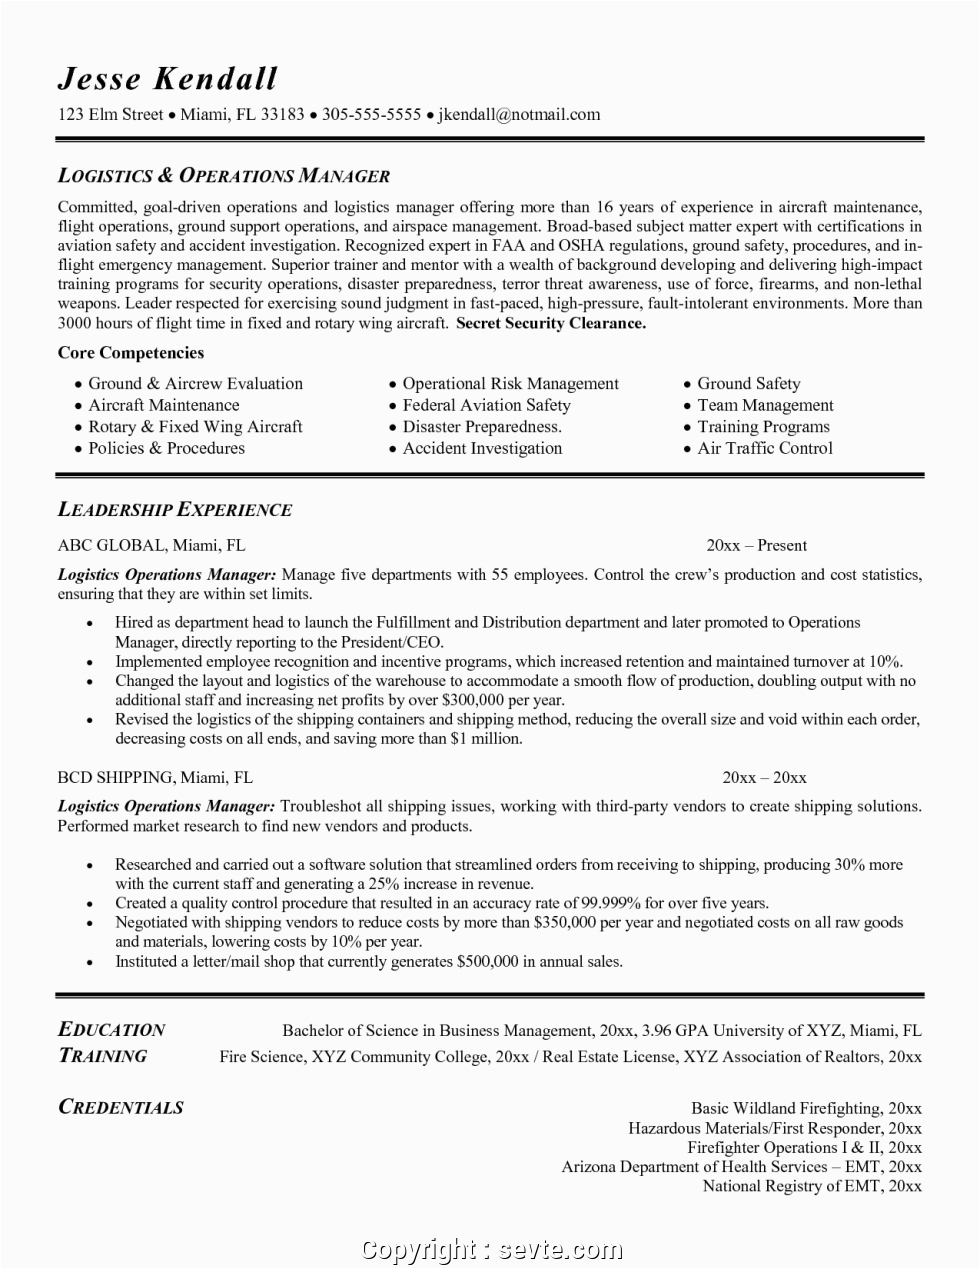 best logistics operations manager resume example